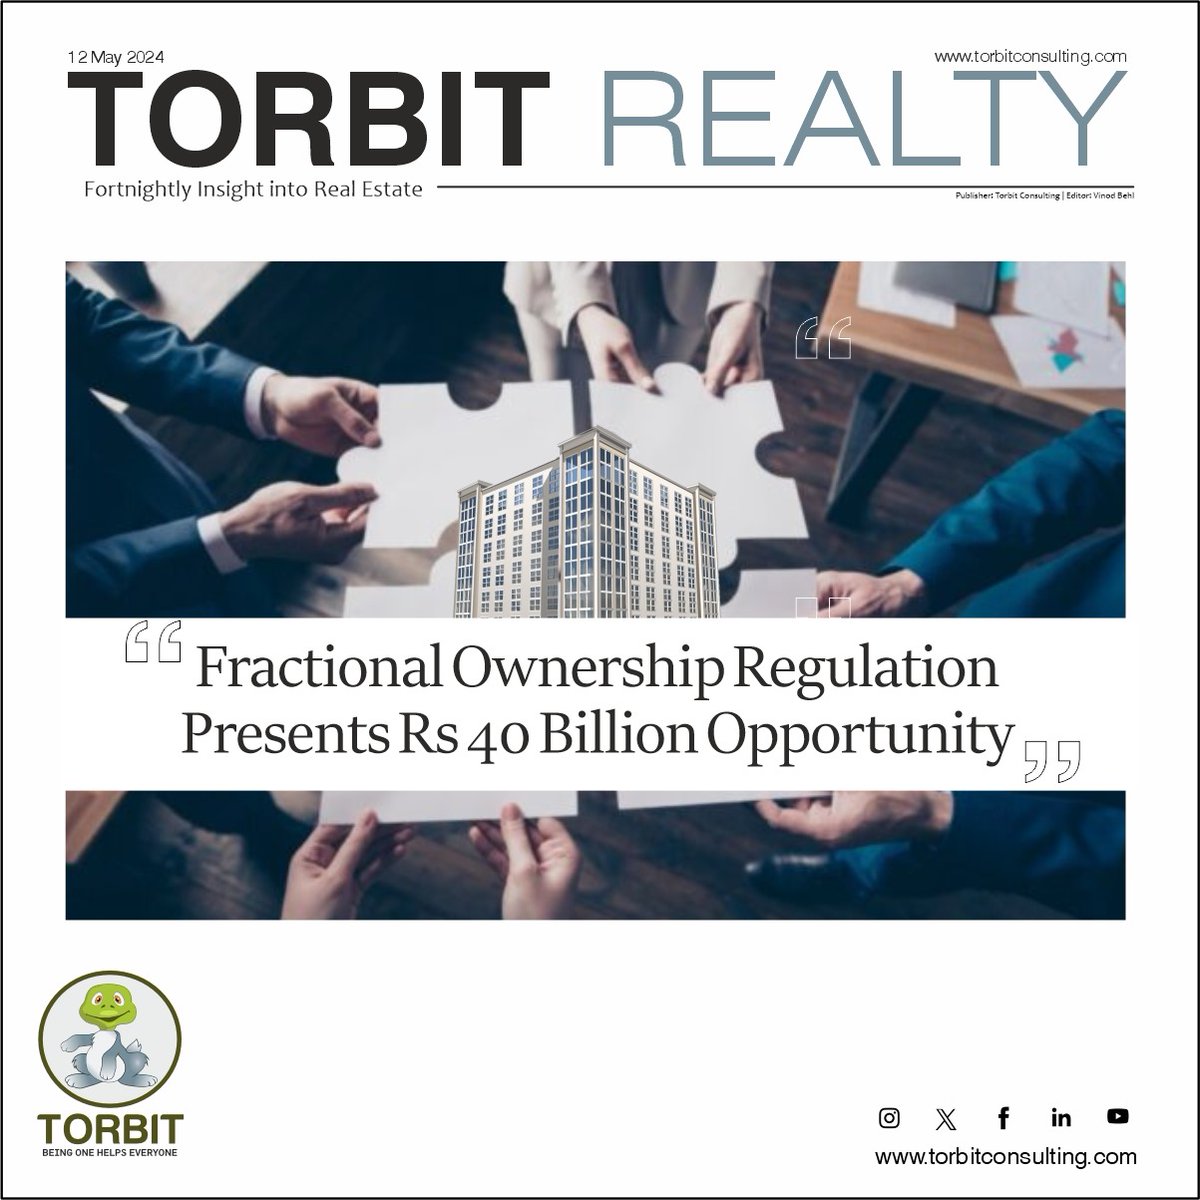 SEBI's latest policy reform, proposals for small and medium REITs for fractional ownership platforms, this will result in Rs 40 billion opportunity.

Read more: bit.ly/4dEOLqD

#torbitrealty #realestateassets #ColliersIndia #officespaces #commercialproperty #buyers